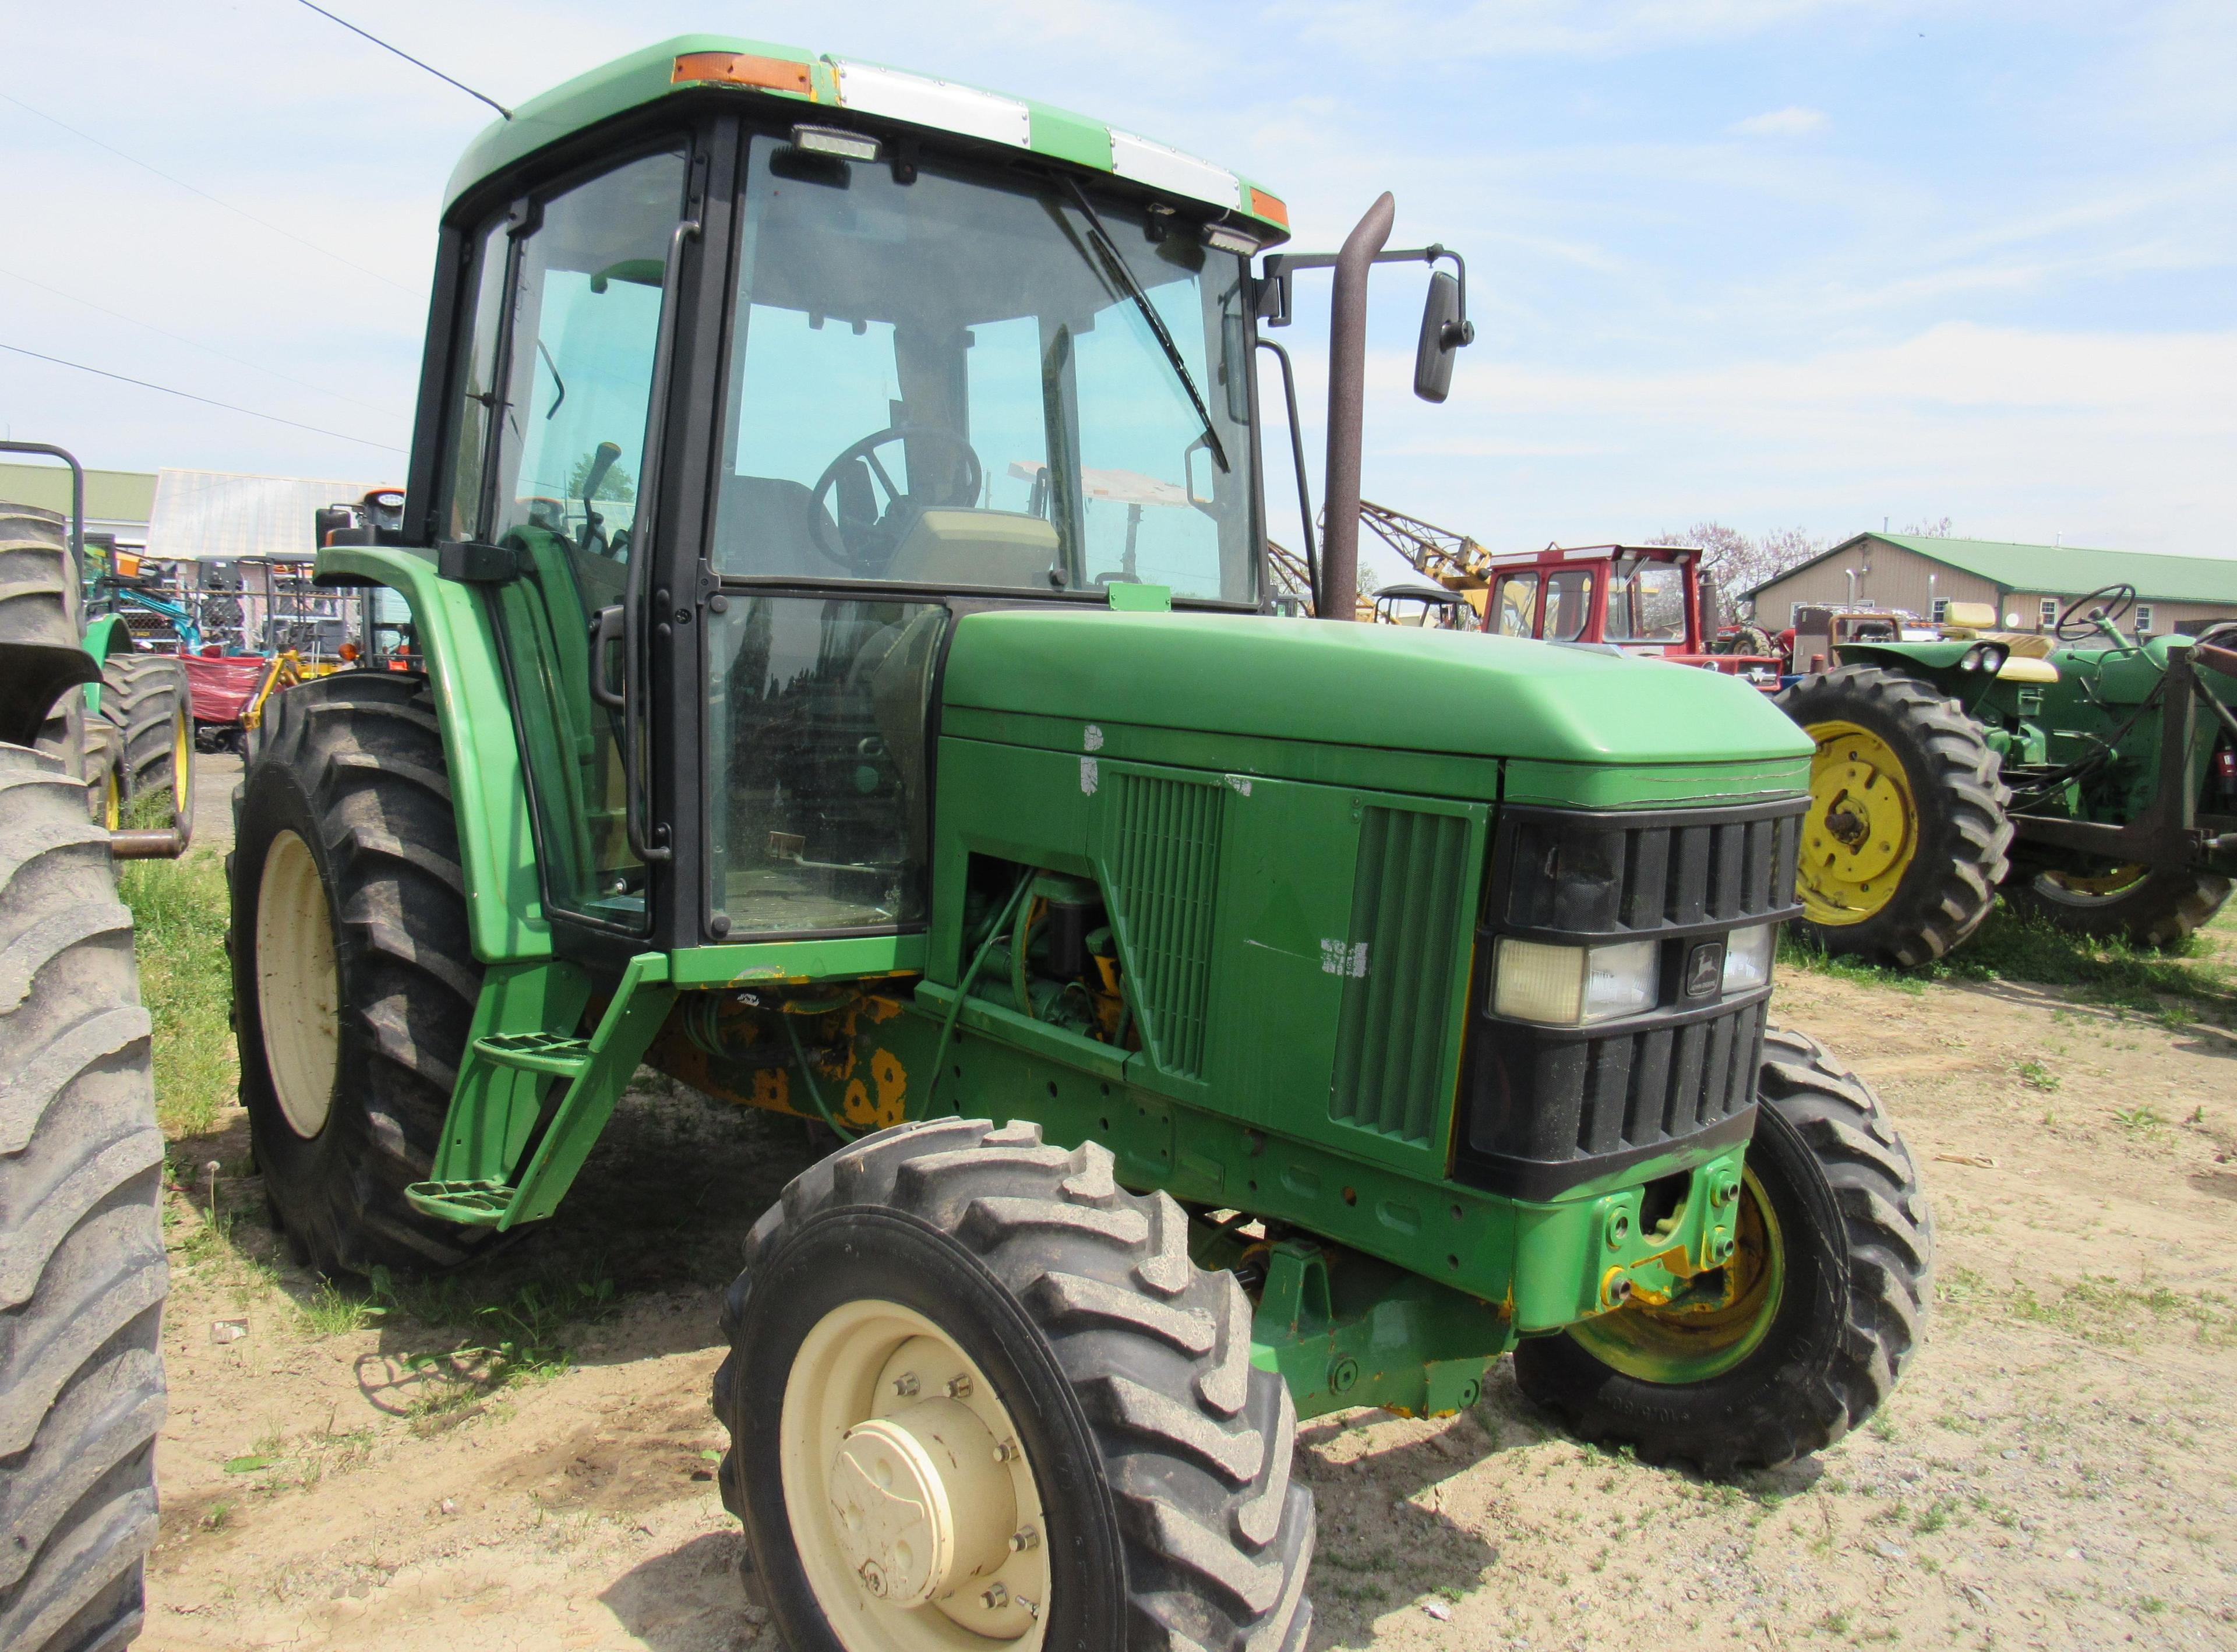 JD 6300 Cab Tractor